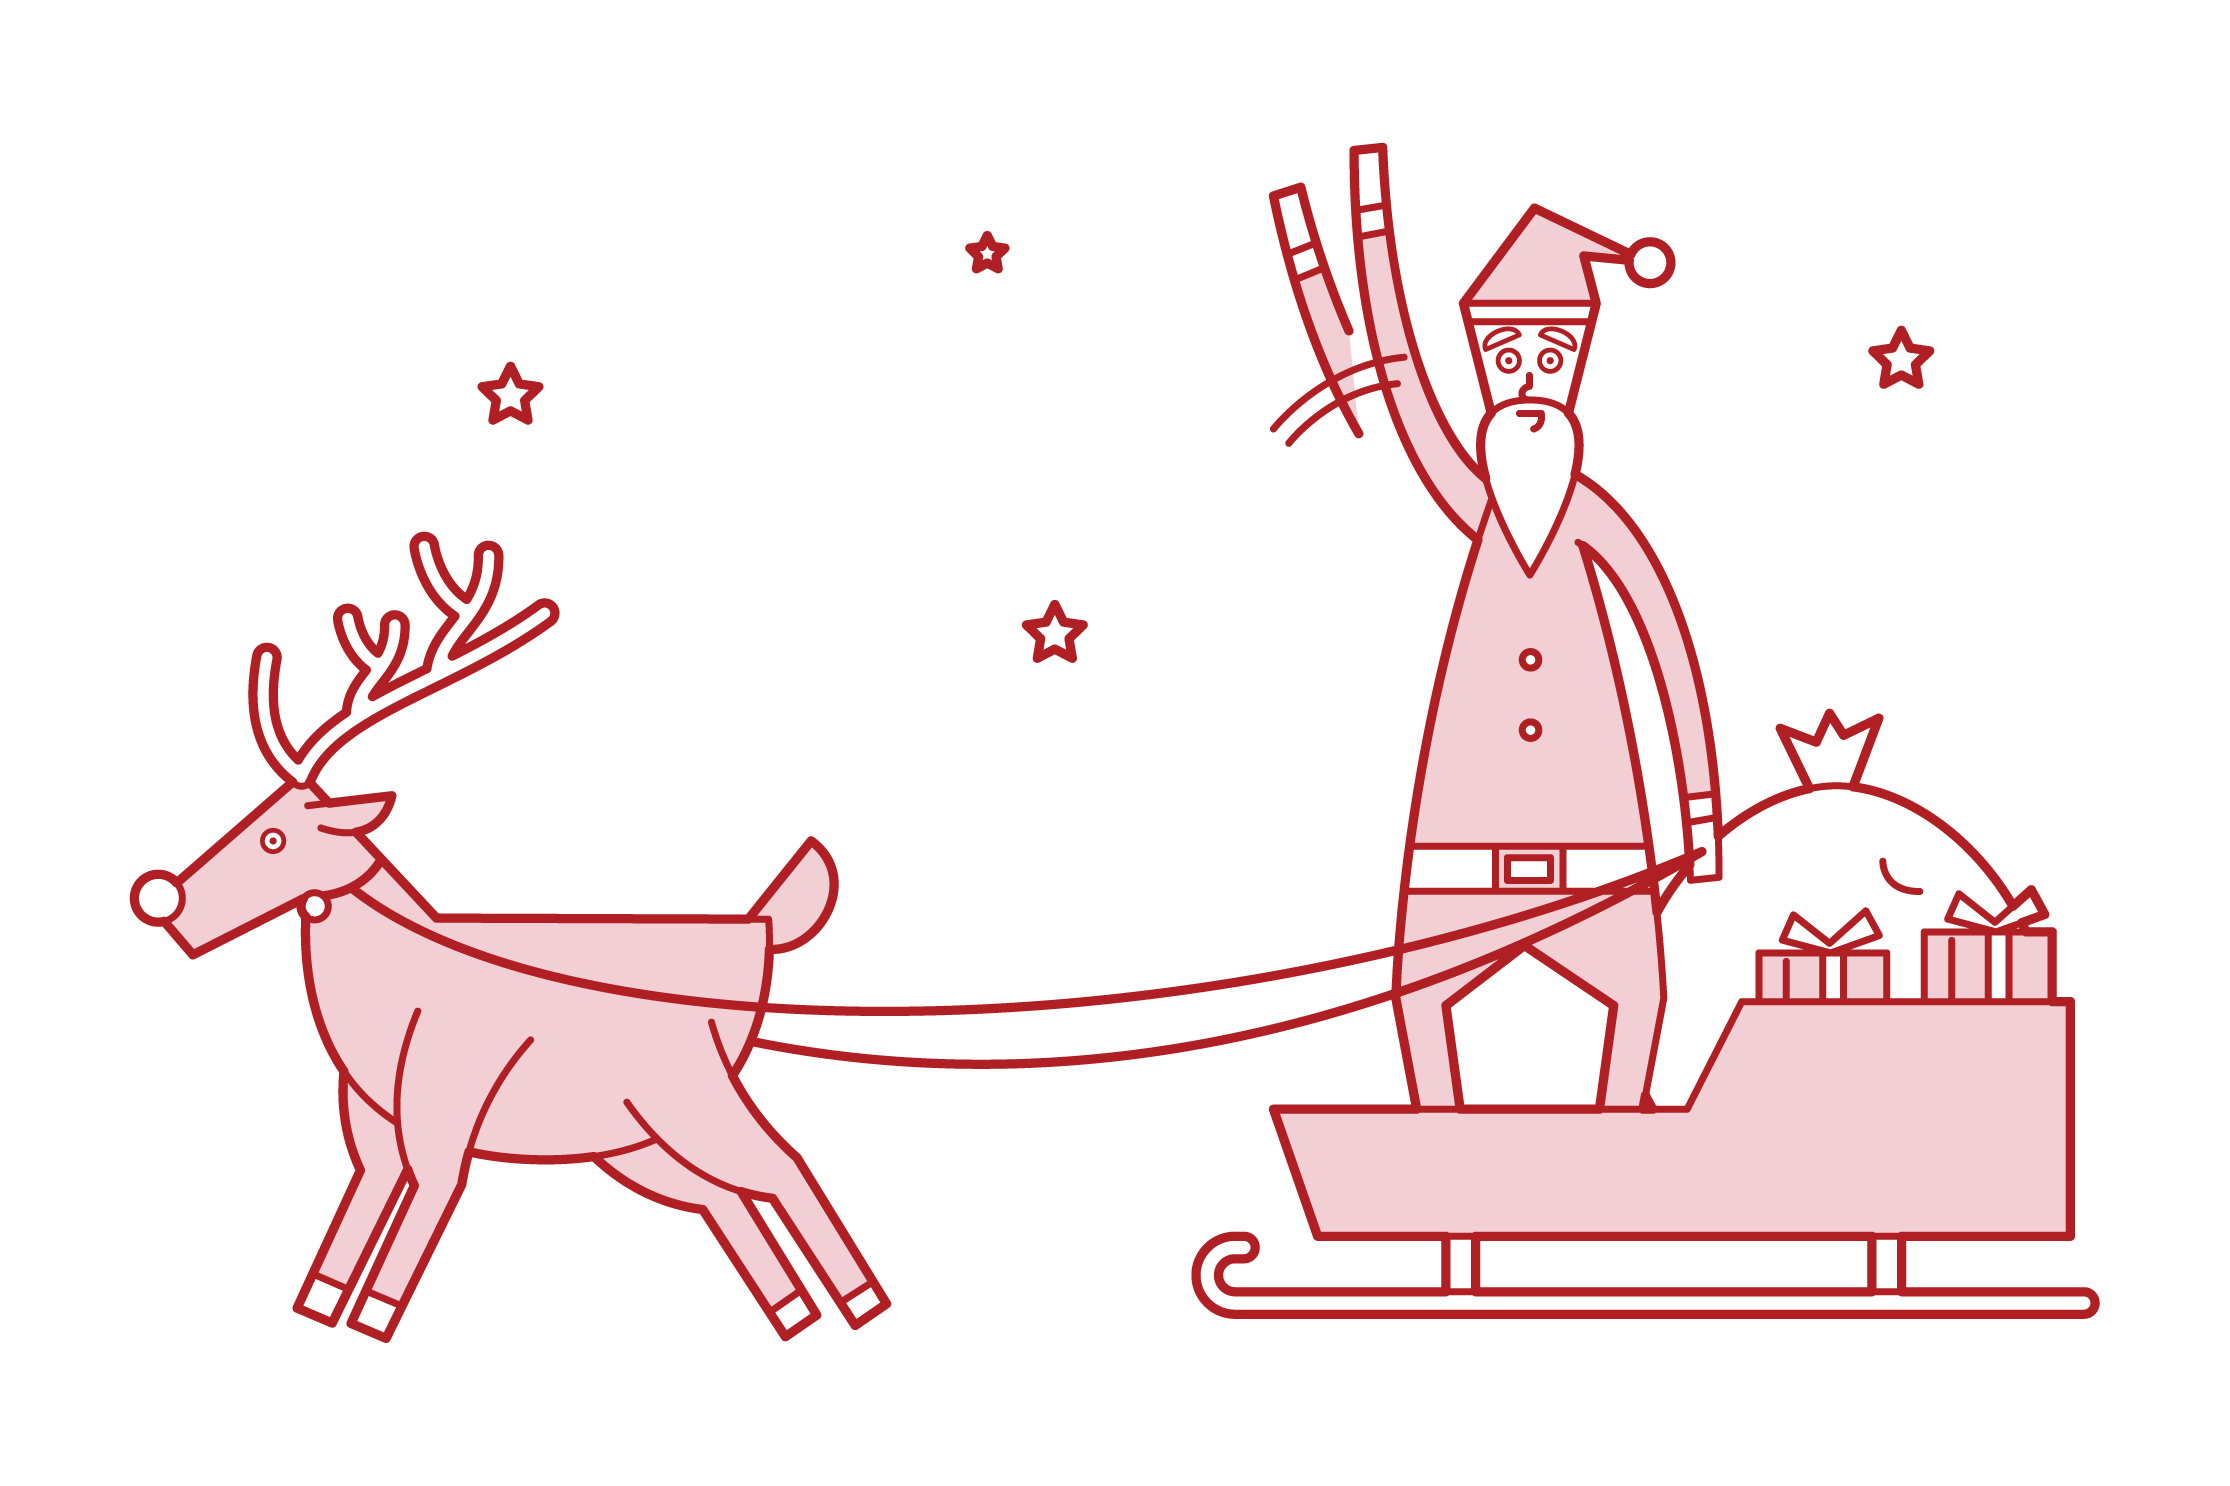 Illustration of Santa Claus waved from the top of a sled